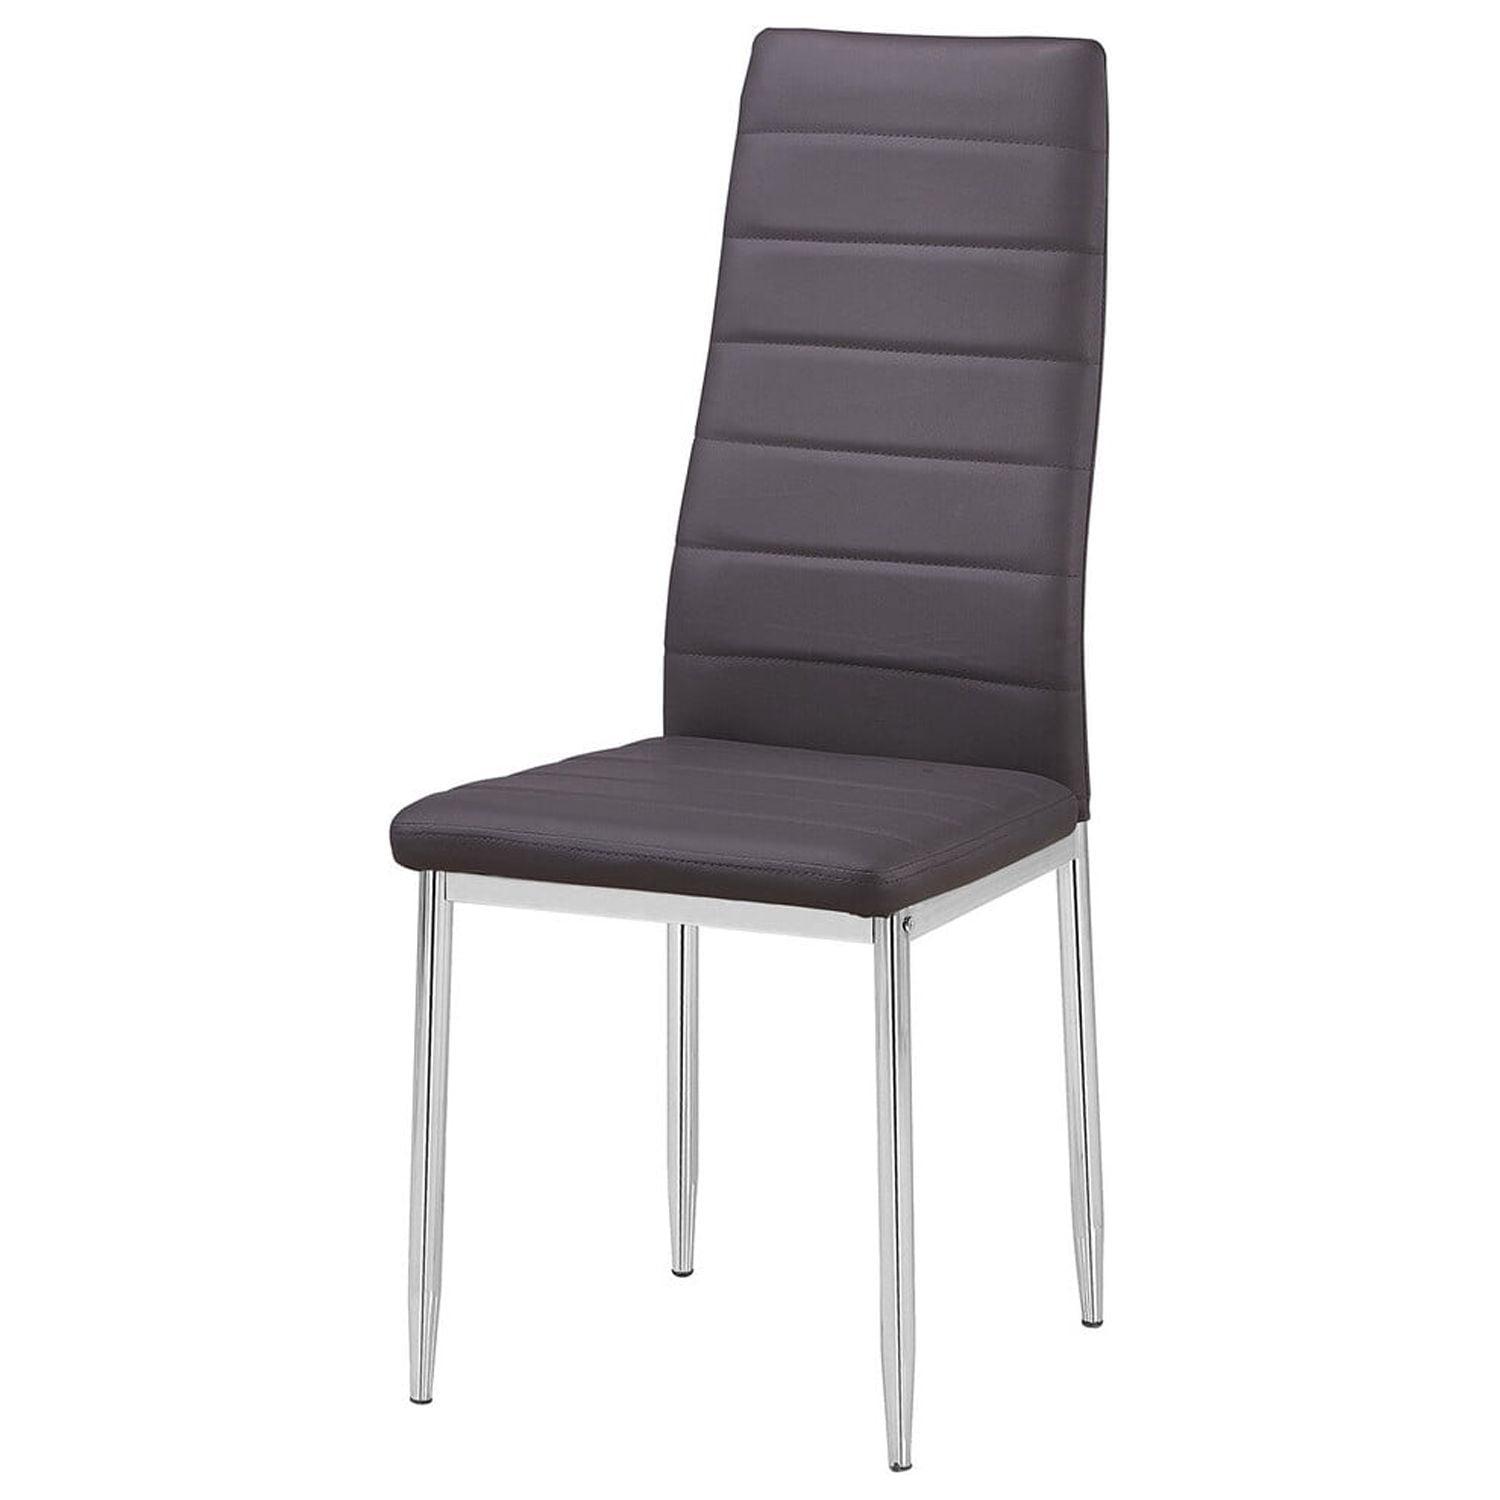 Parsons High Back Side Chair in Gray with Chrome Legs (Set of 2)